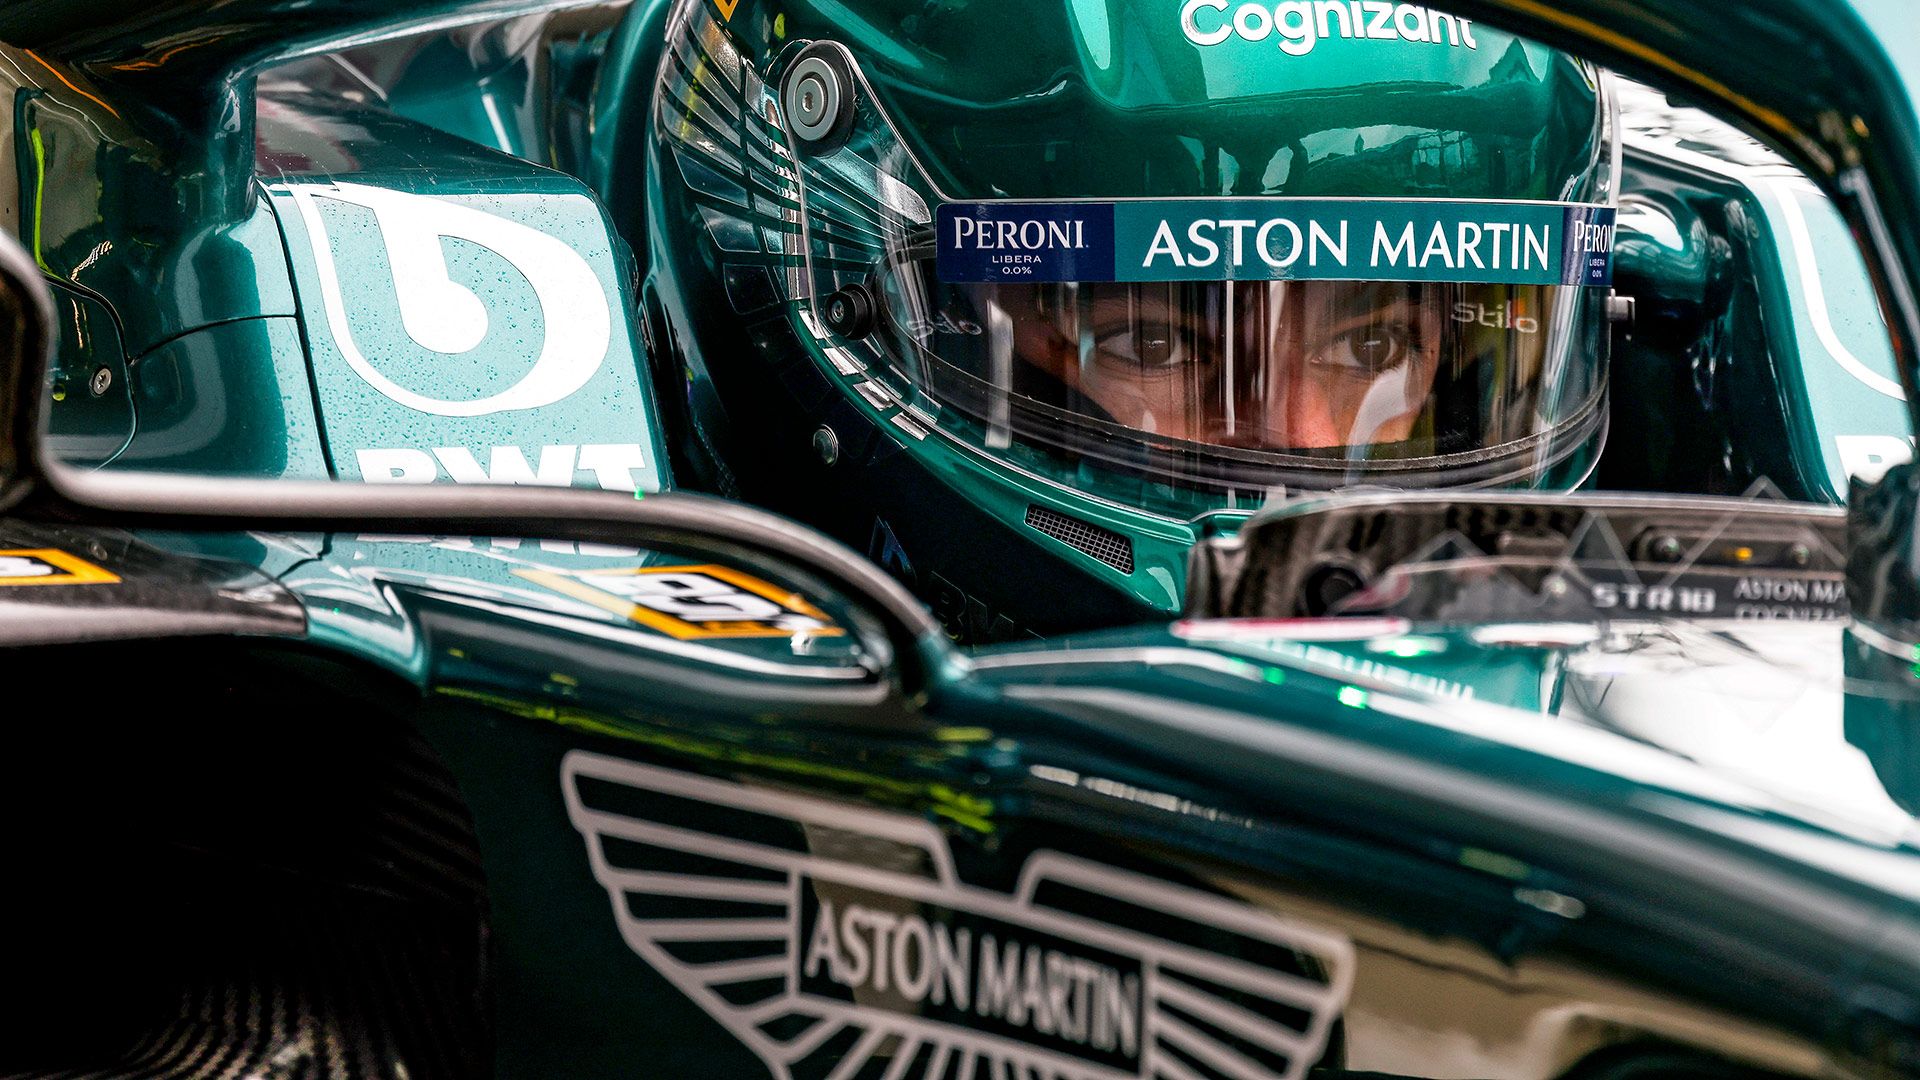 Aston Martin targeting title challenge within 'three to five years' says Otmar Szafnauer. Formula 1®